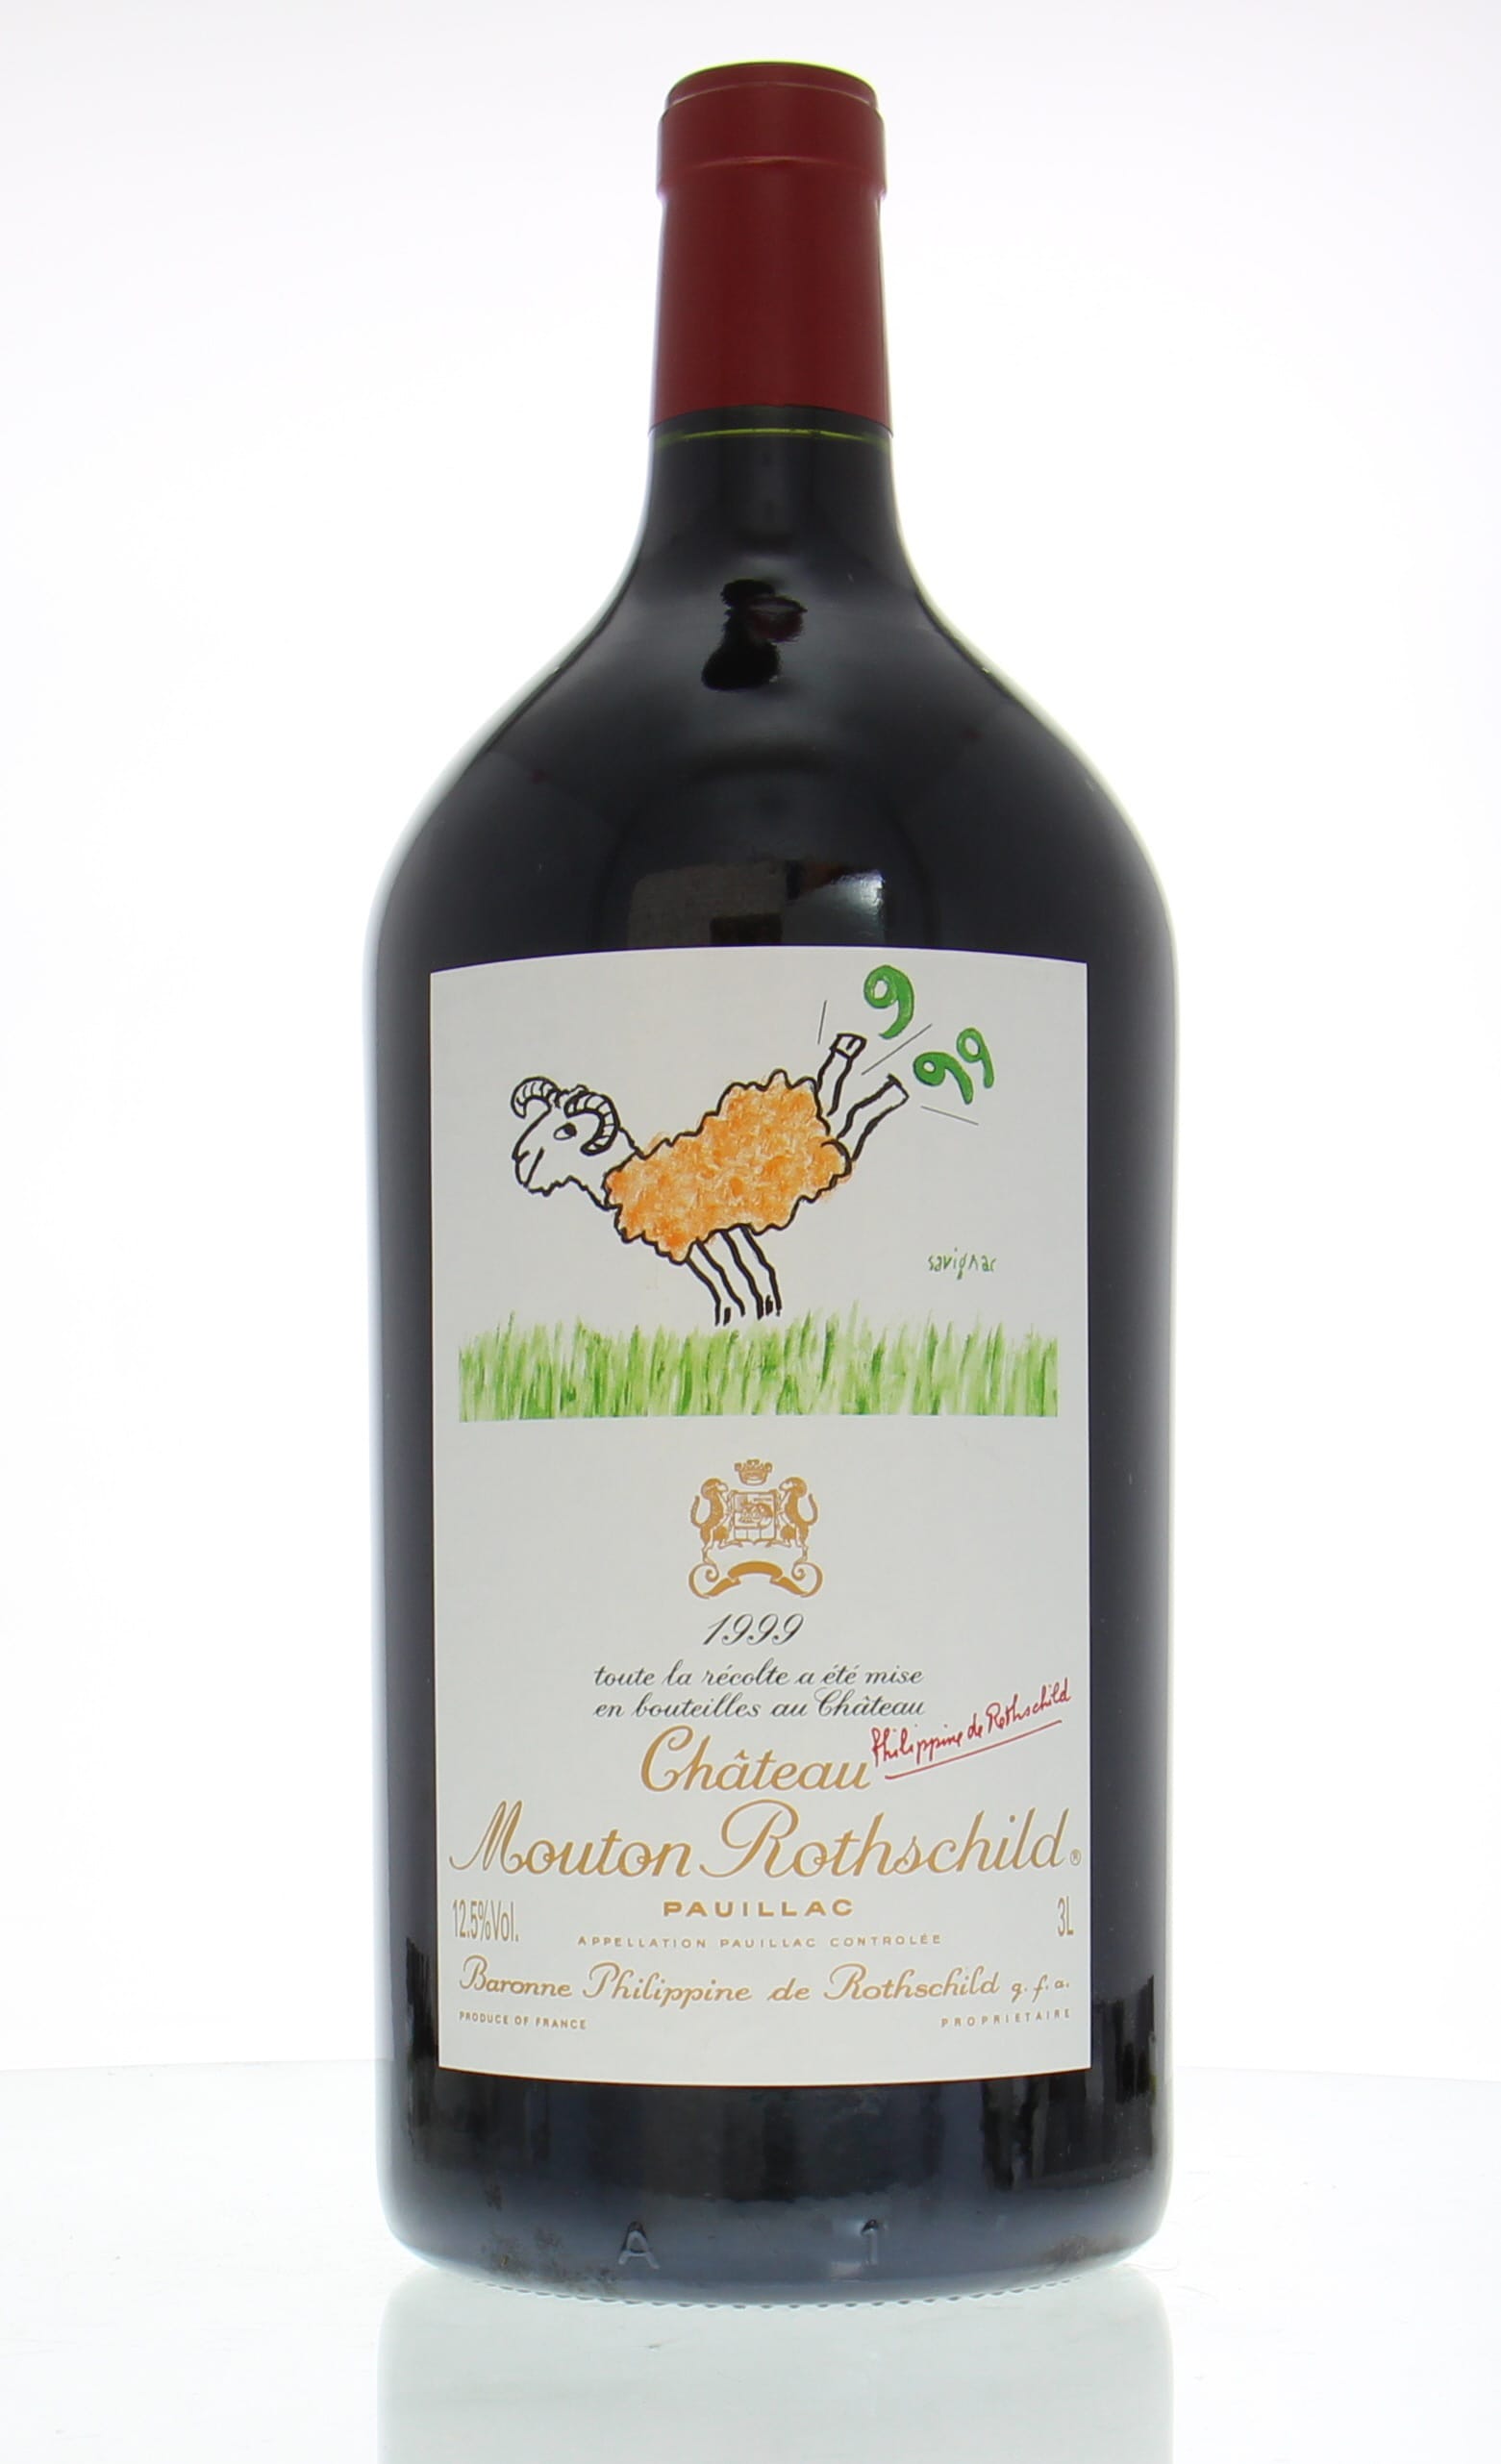 Chateau Mouton Rothschild - Chateau Mouton Rothschild 1999 In OWC of 3